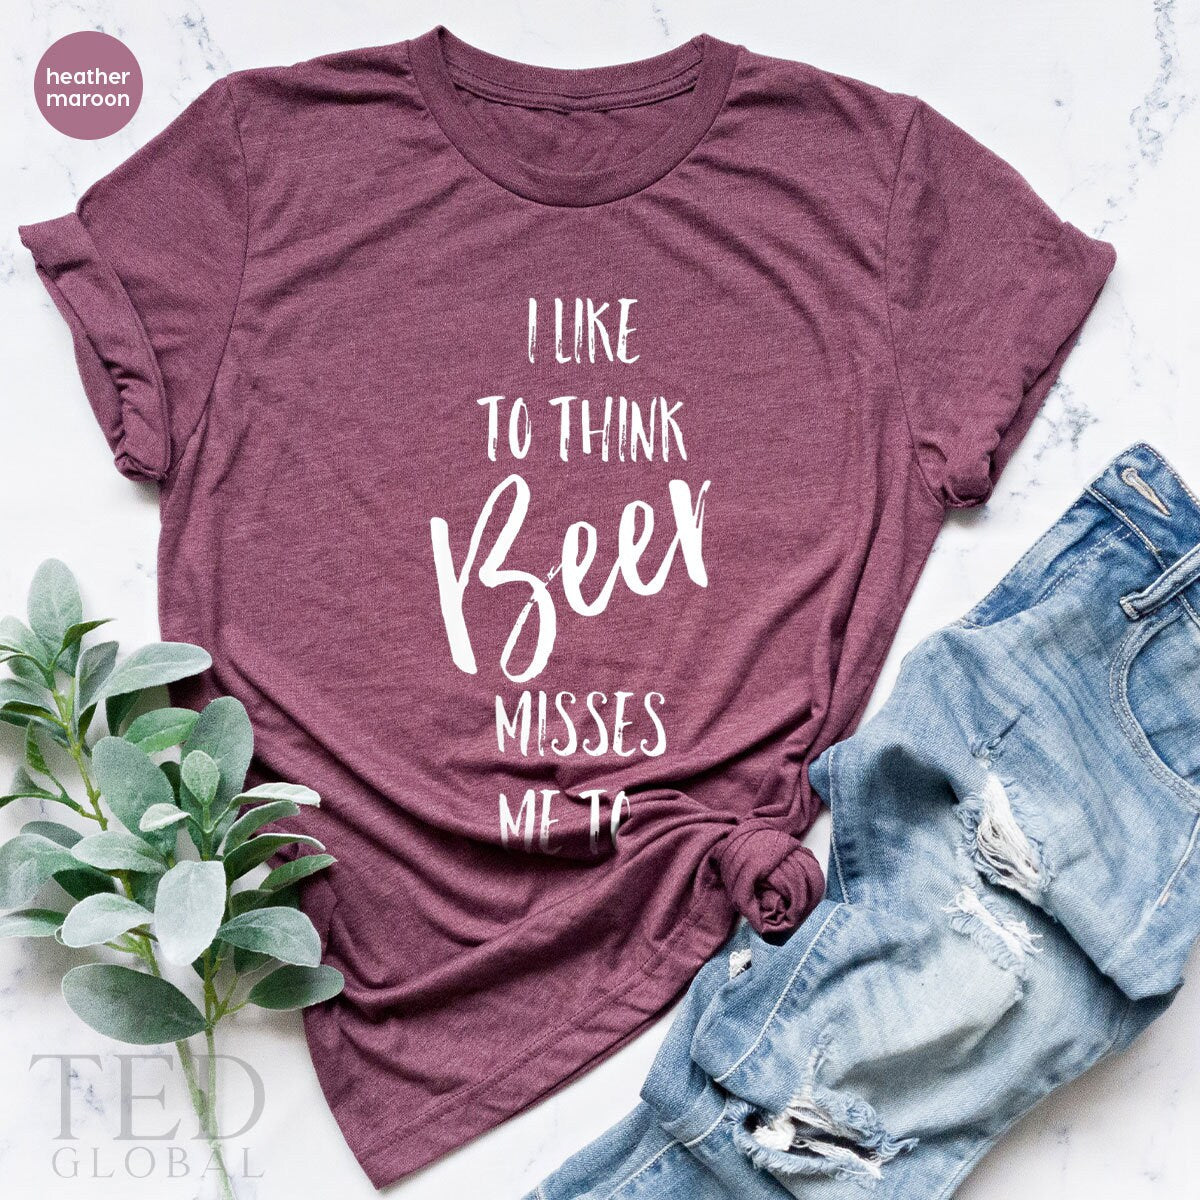 Drinker T-Shirt, I Like To Think Beer Misses Me Too T Shirt, Alcoholic Tee, Beer Lover Shirts, Drinking Party Shirt, Gift For Drinker - Fastdeliverytees.com